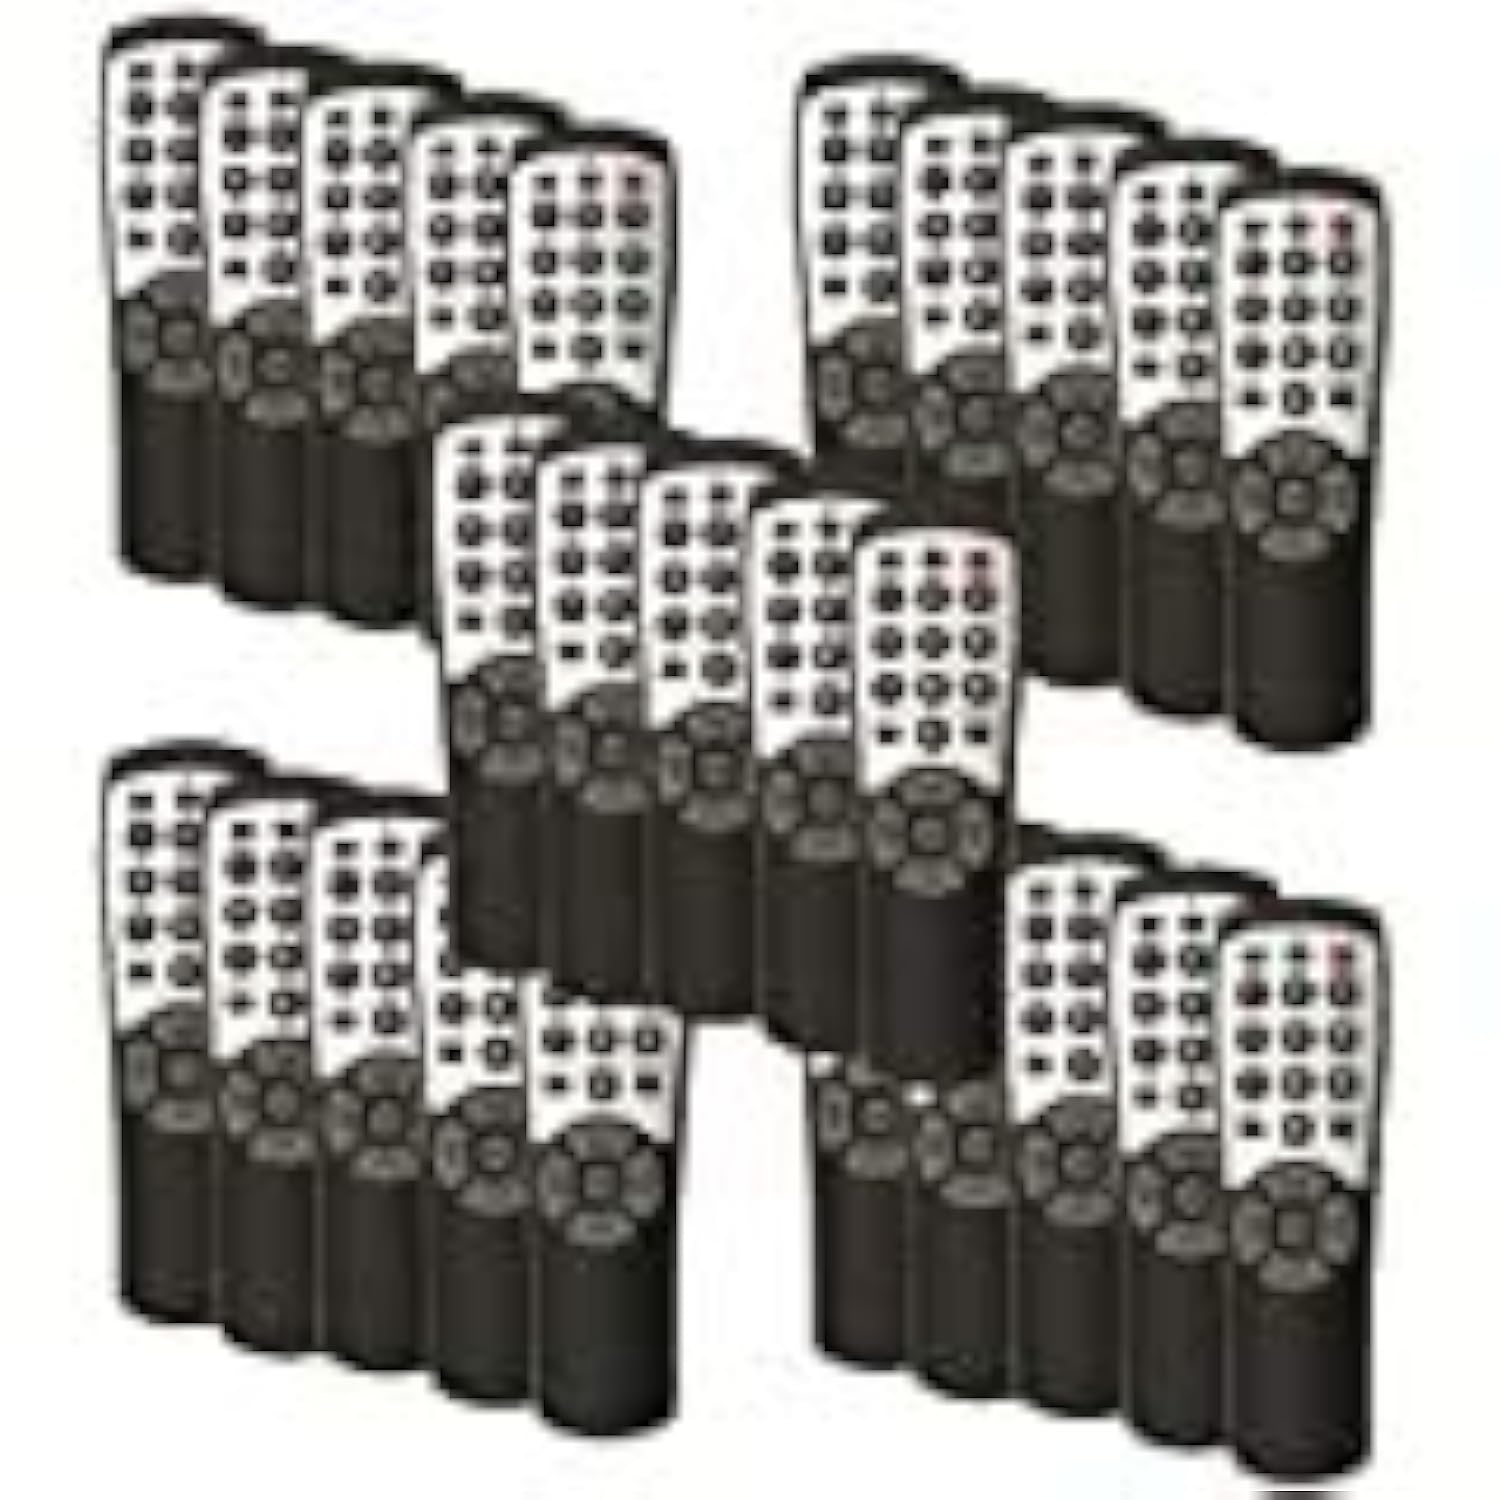 Great Choice Products 50-Pack Brightstar Br100B Universal Tv Remote